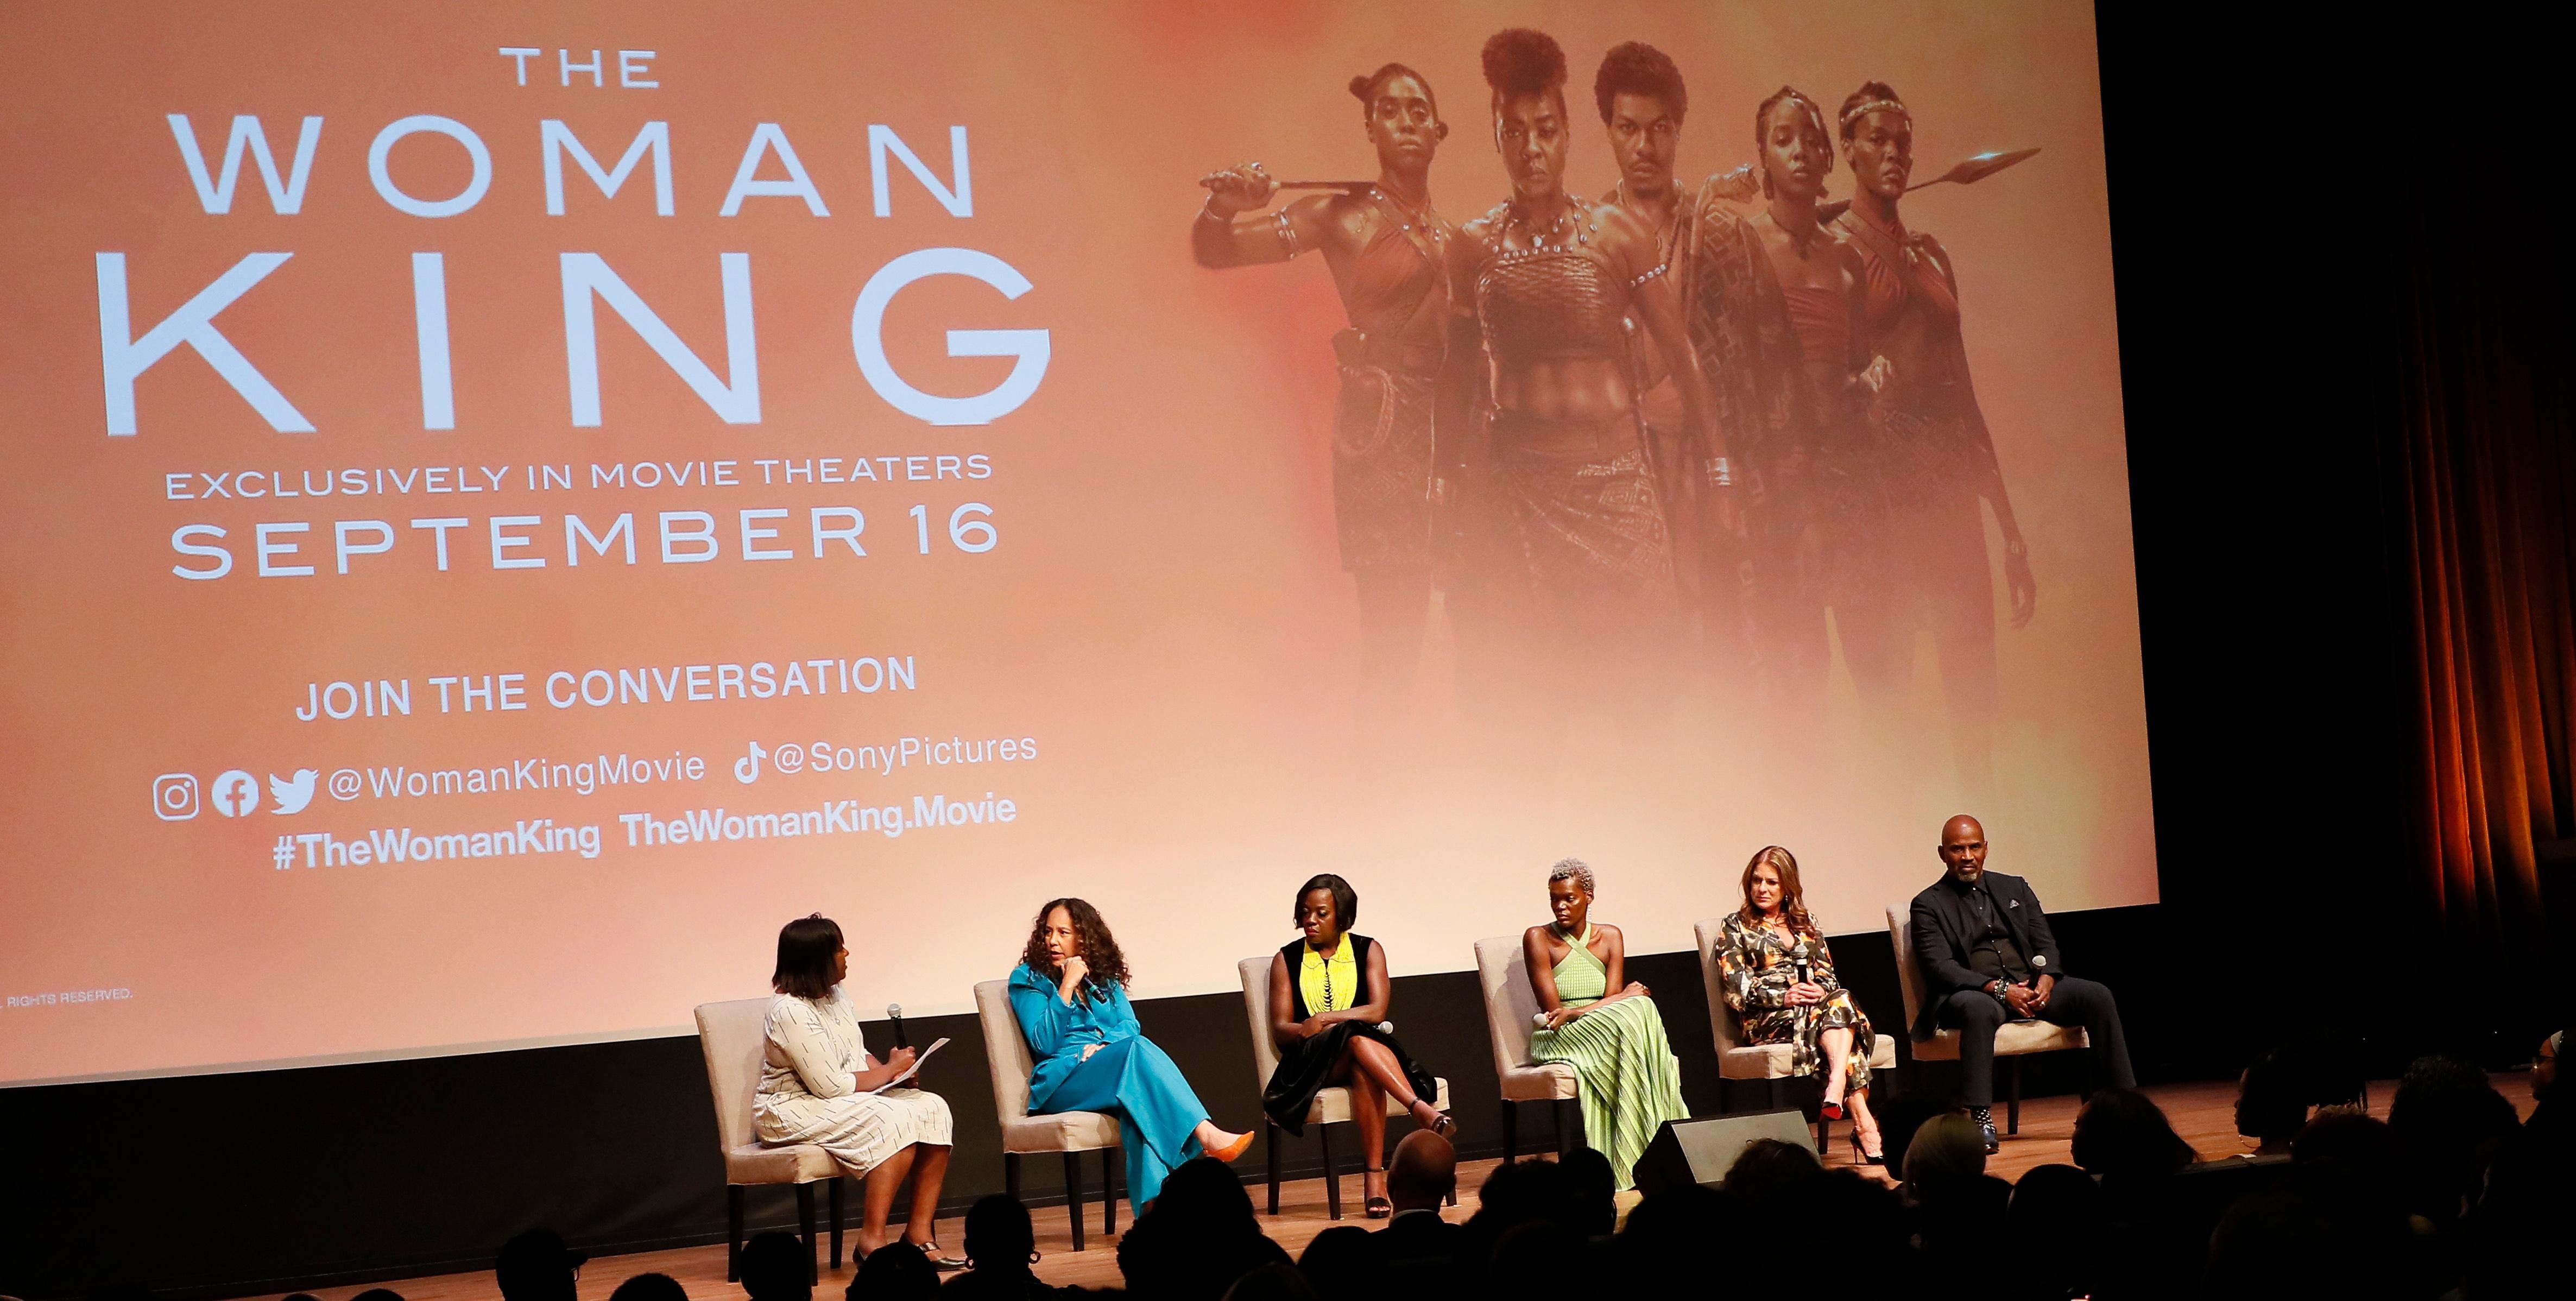 Dwandalyn Reece, Gina Prince-Bythewood, Viola Davis, Shiela Atim, Cathy Shulman, and Julius Tennon speak onstage during a special screening of The Woman King at the National Museum of African American History and Culture on September 15, 2022 in Washington, D.C.